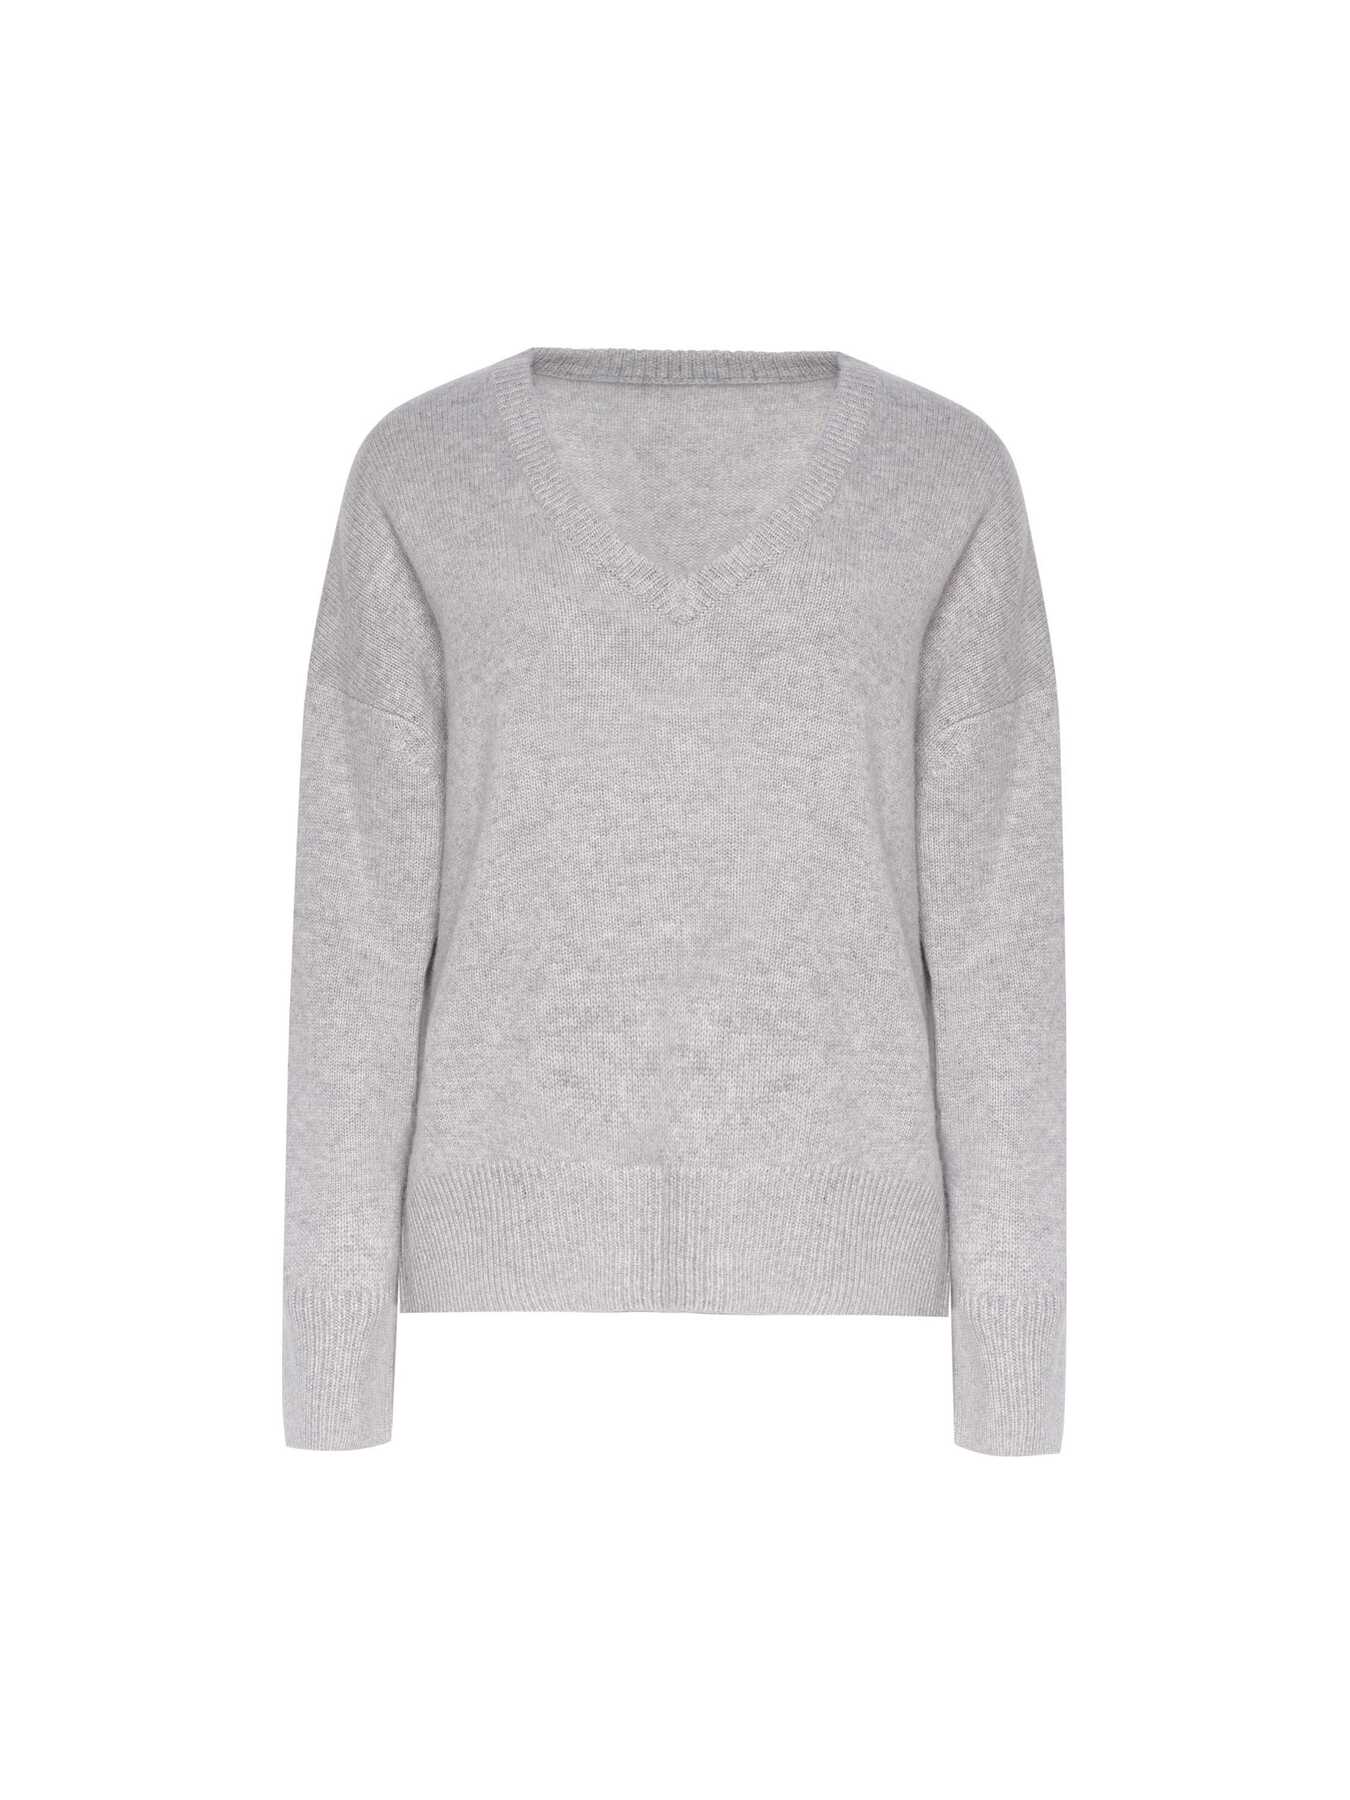 PEARL GREY PULLOVER